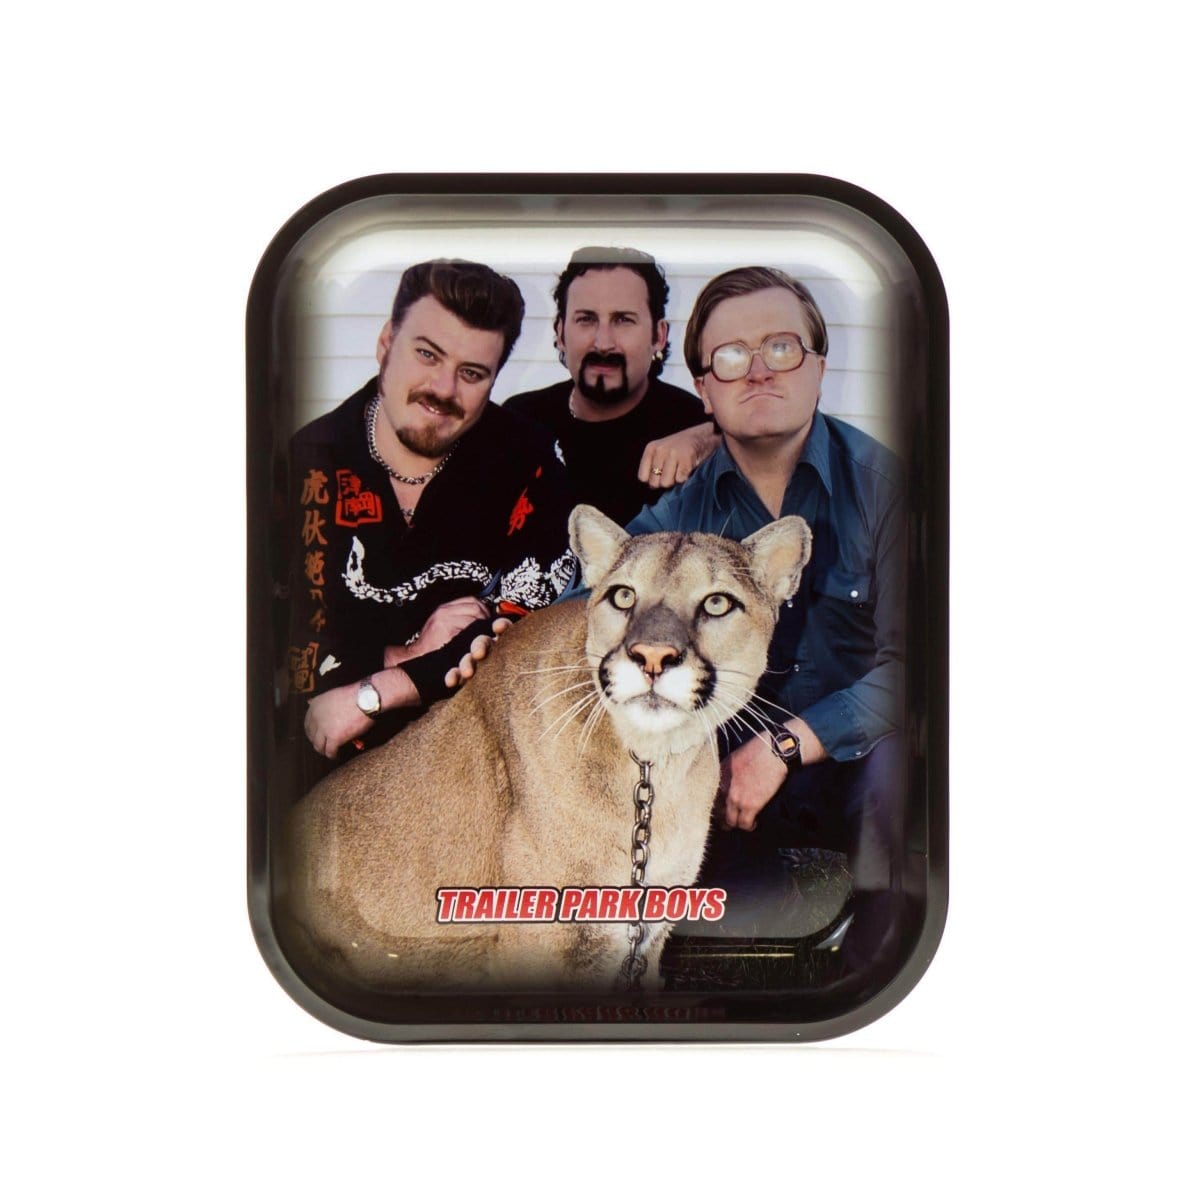 Trailer Park Boys Rolling Tray Large Big Kitty Rolling Tray